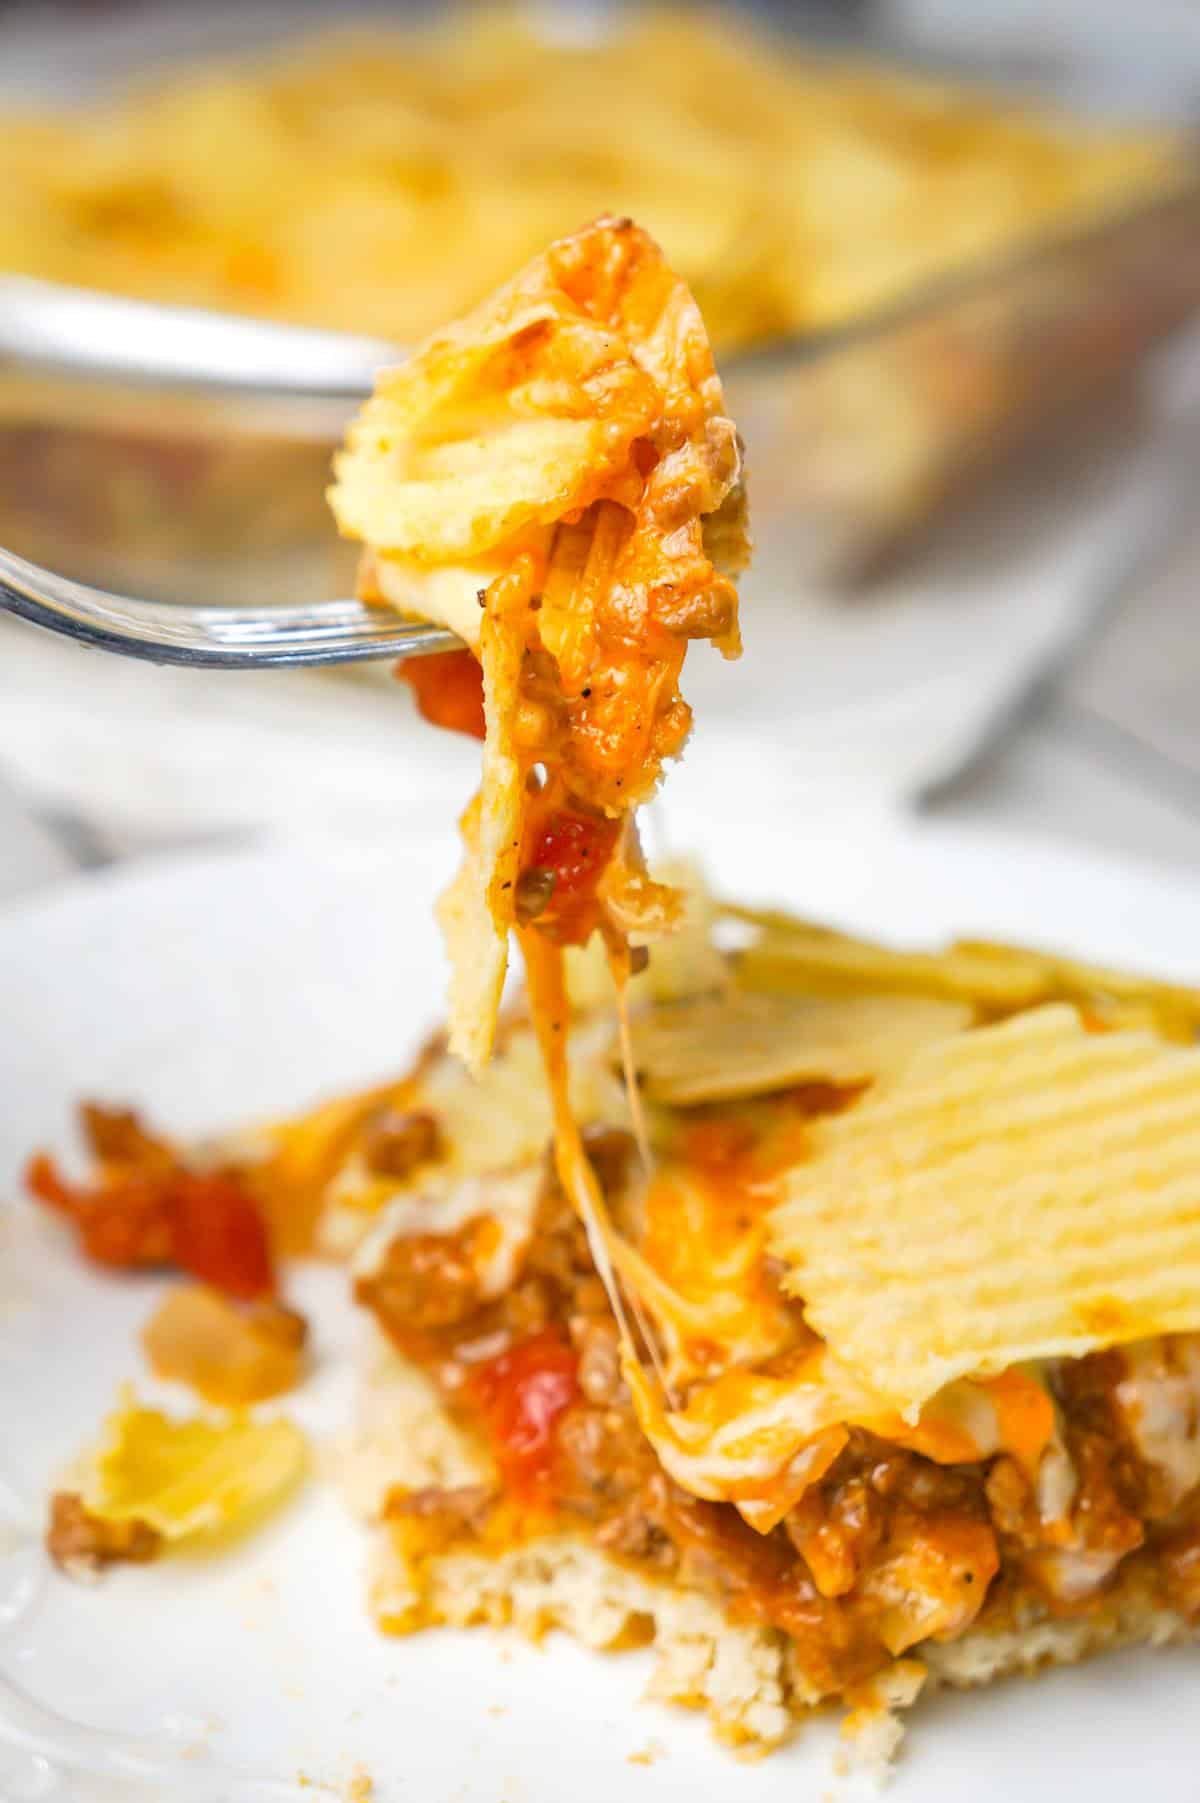 Cheeseburger Casserole with Potato Chips is an easy ground beef dinner recipe with a Bisquick base loaded with hamburger meat, diced onions, tomatoes and cheese all topped with ruffled potato chips.